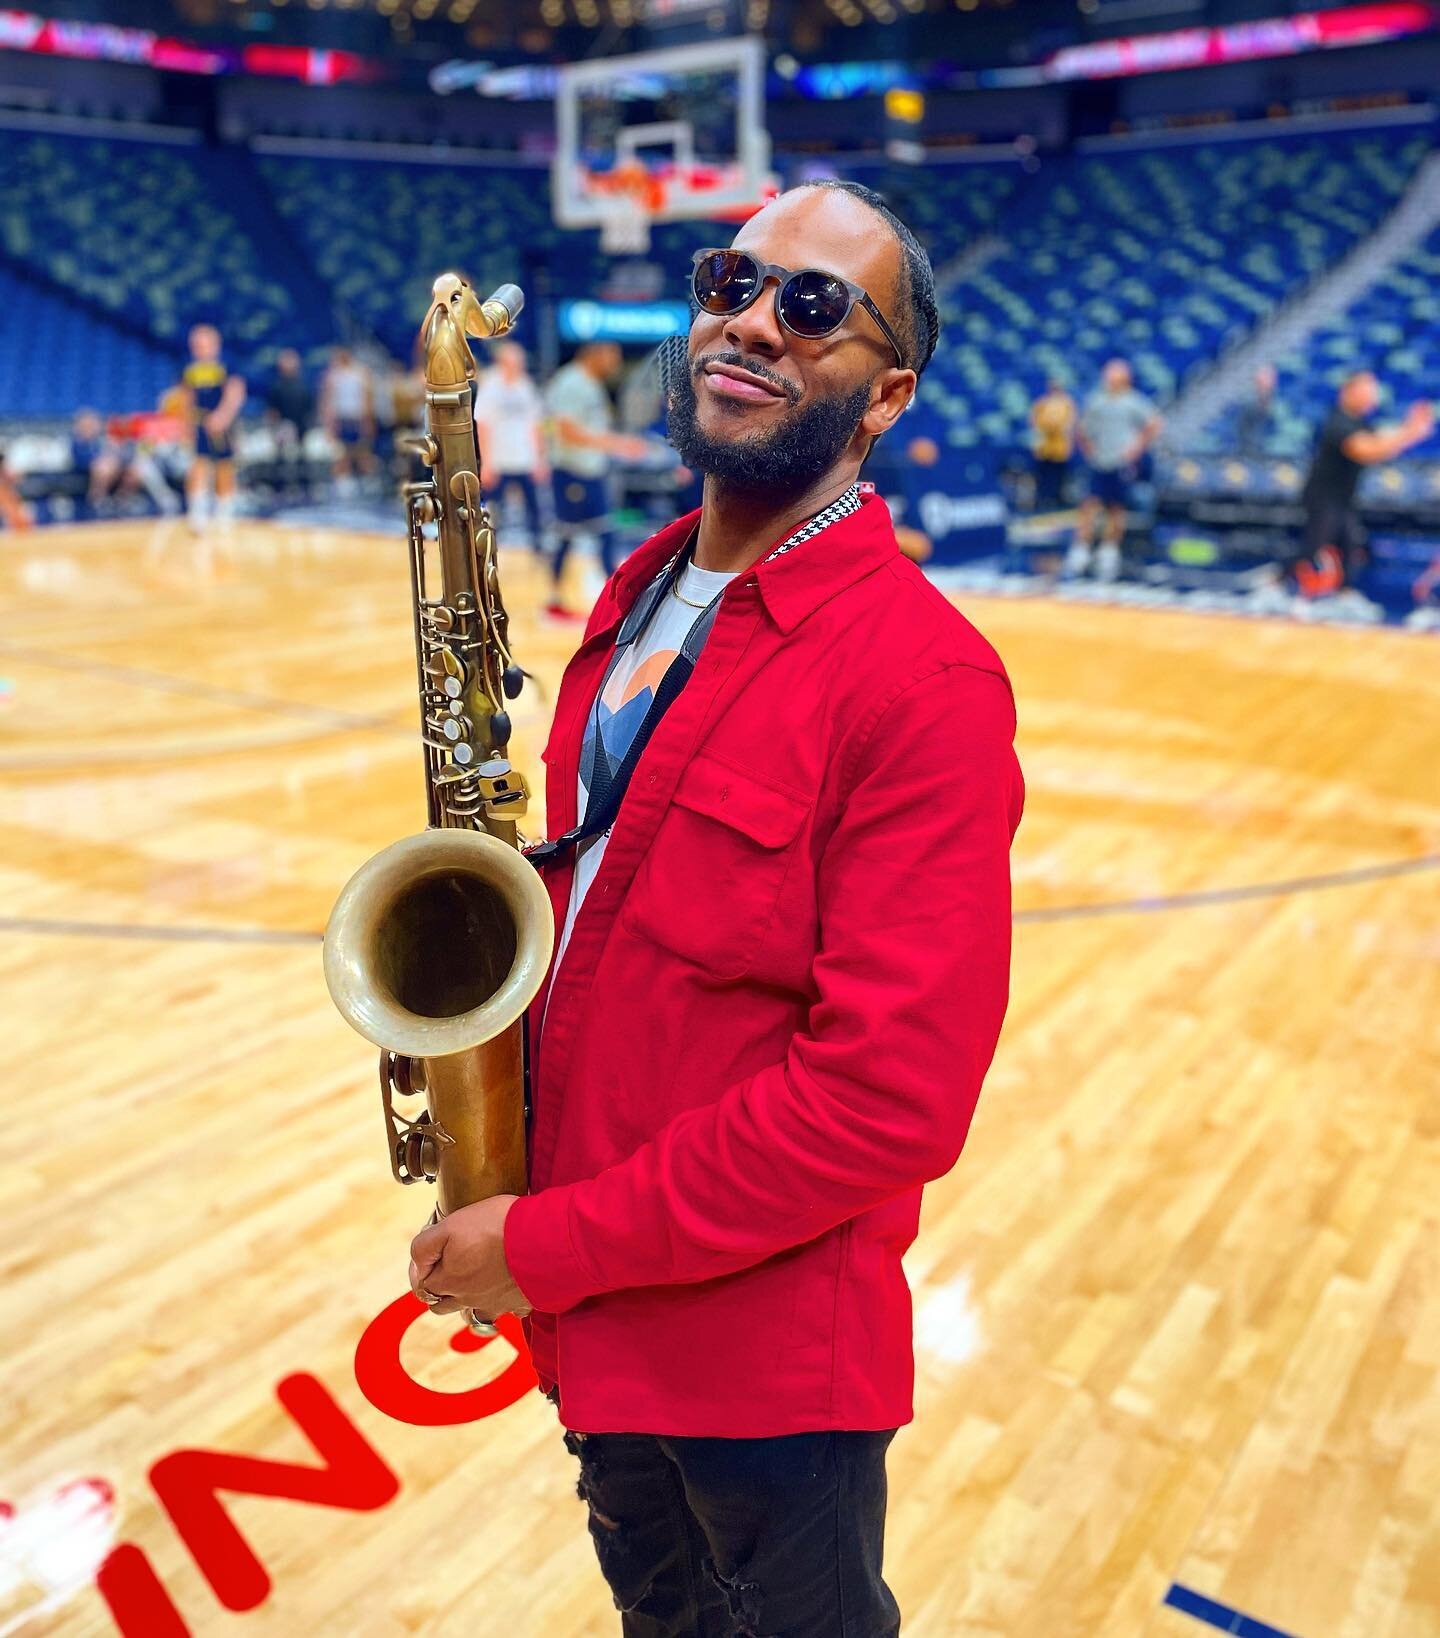 Had a great time playing the halftime show for the @pelicansnba game today! Been playing all the best shows in New Orleans this past month!
.
.
#Music #NBA #Basketball #Saxophone #NewOrleans #Pelicans #GameDay #Band #Red #Win #Halftime